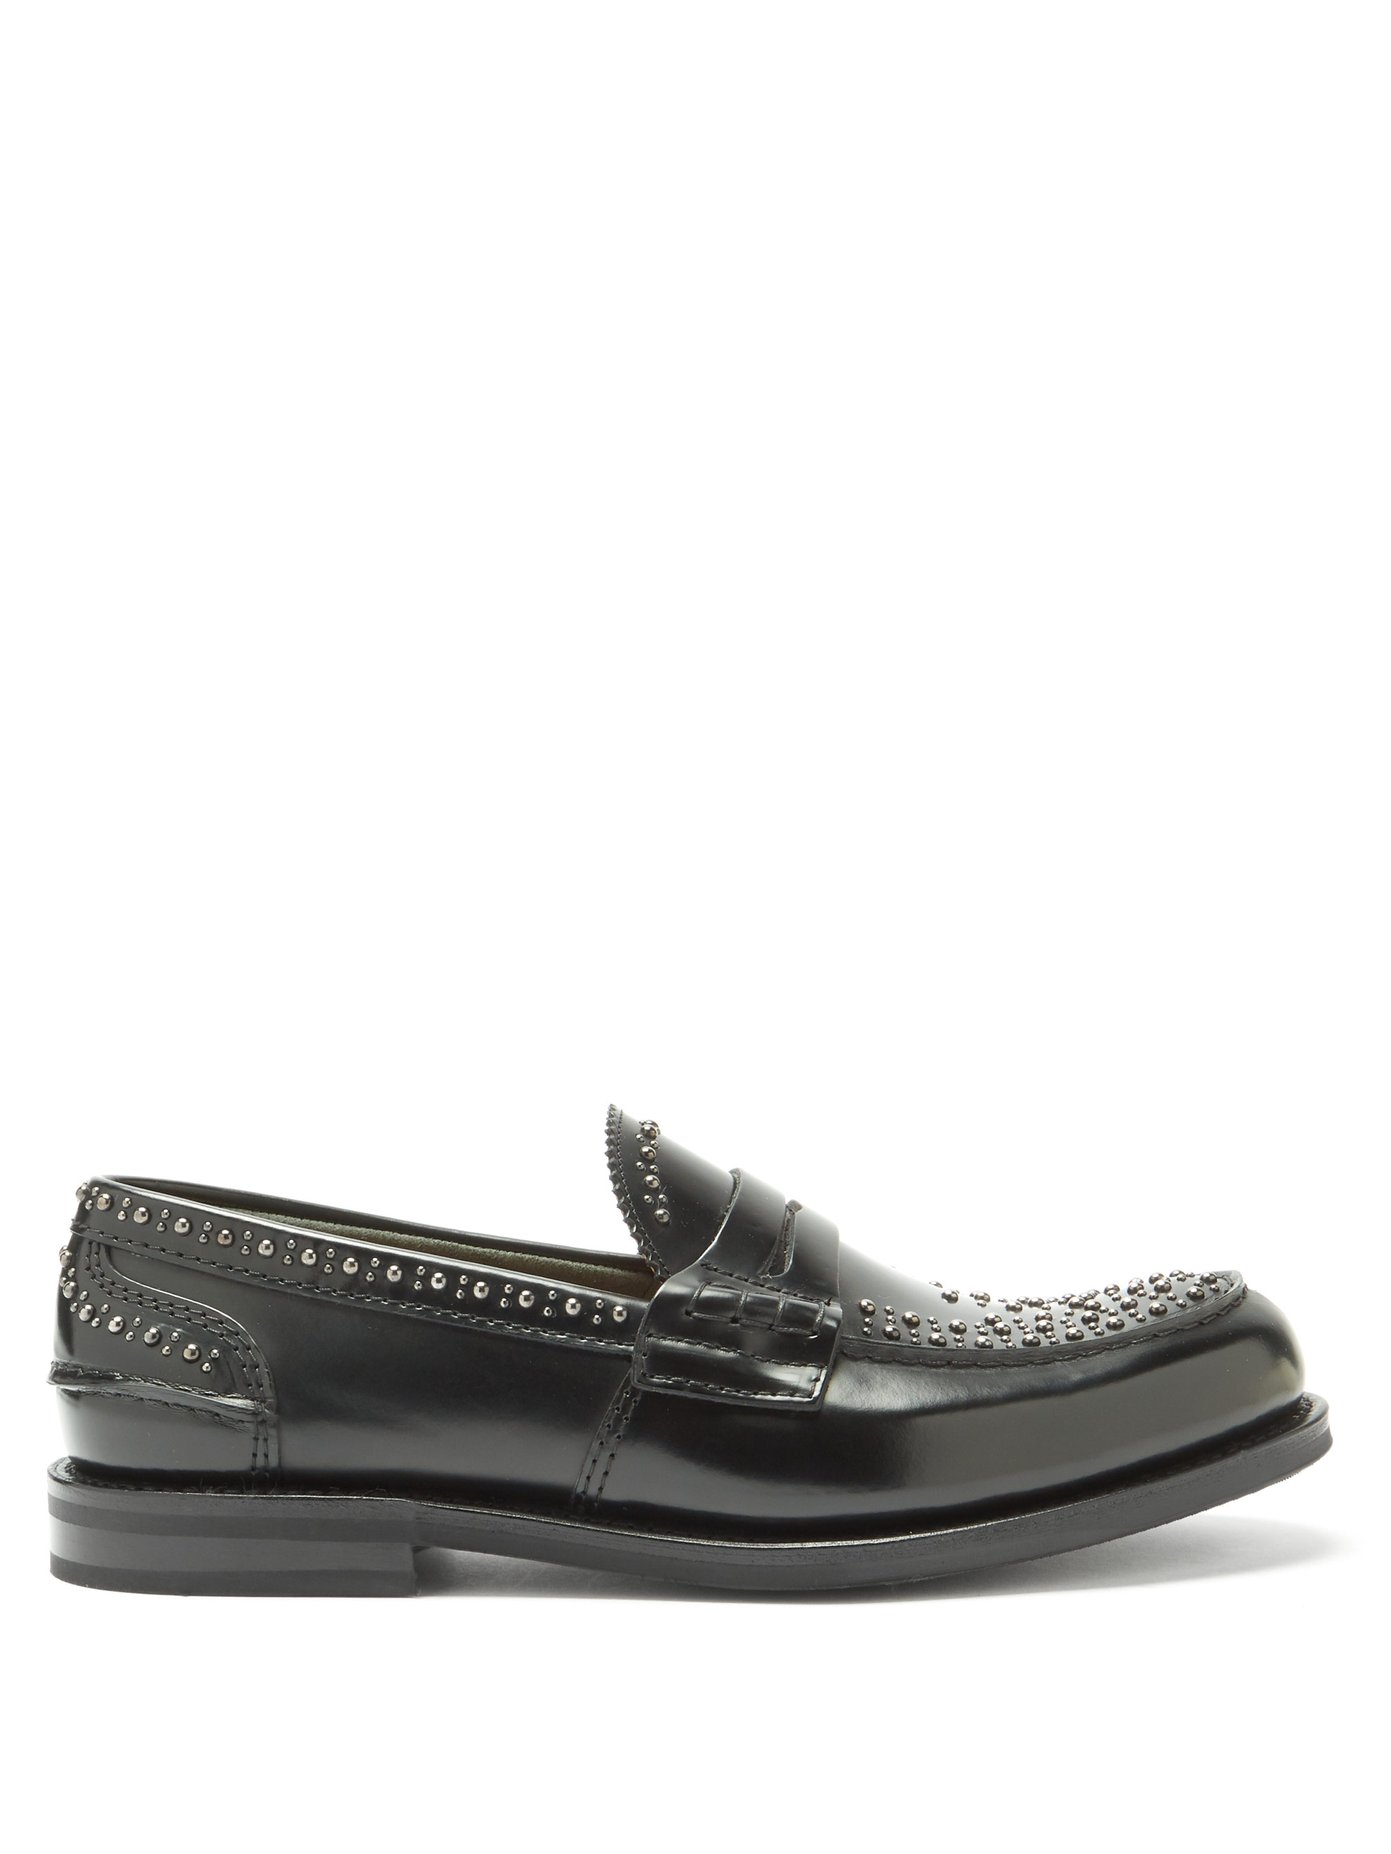 rubber penny loafers